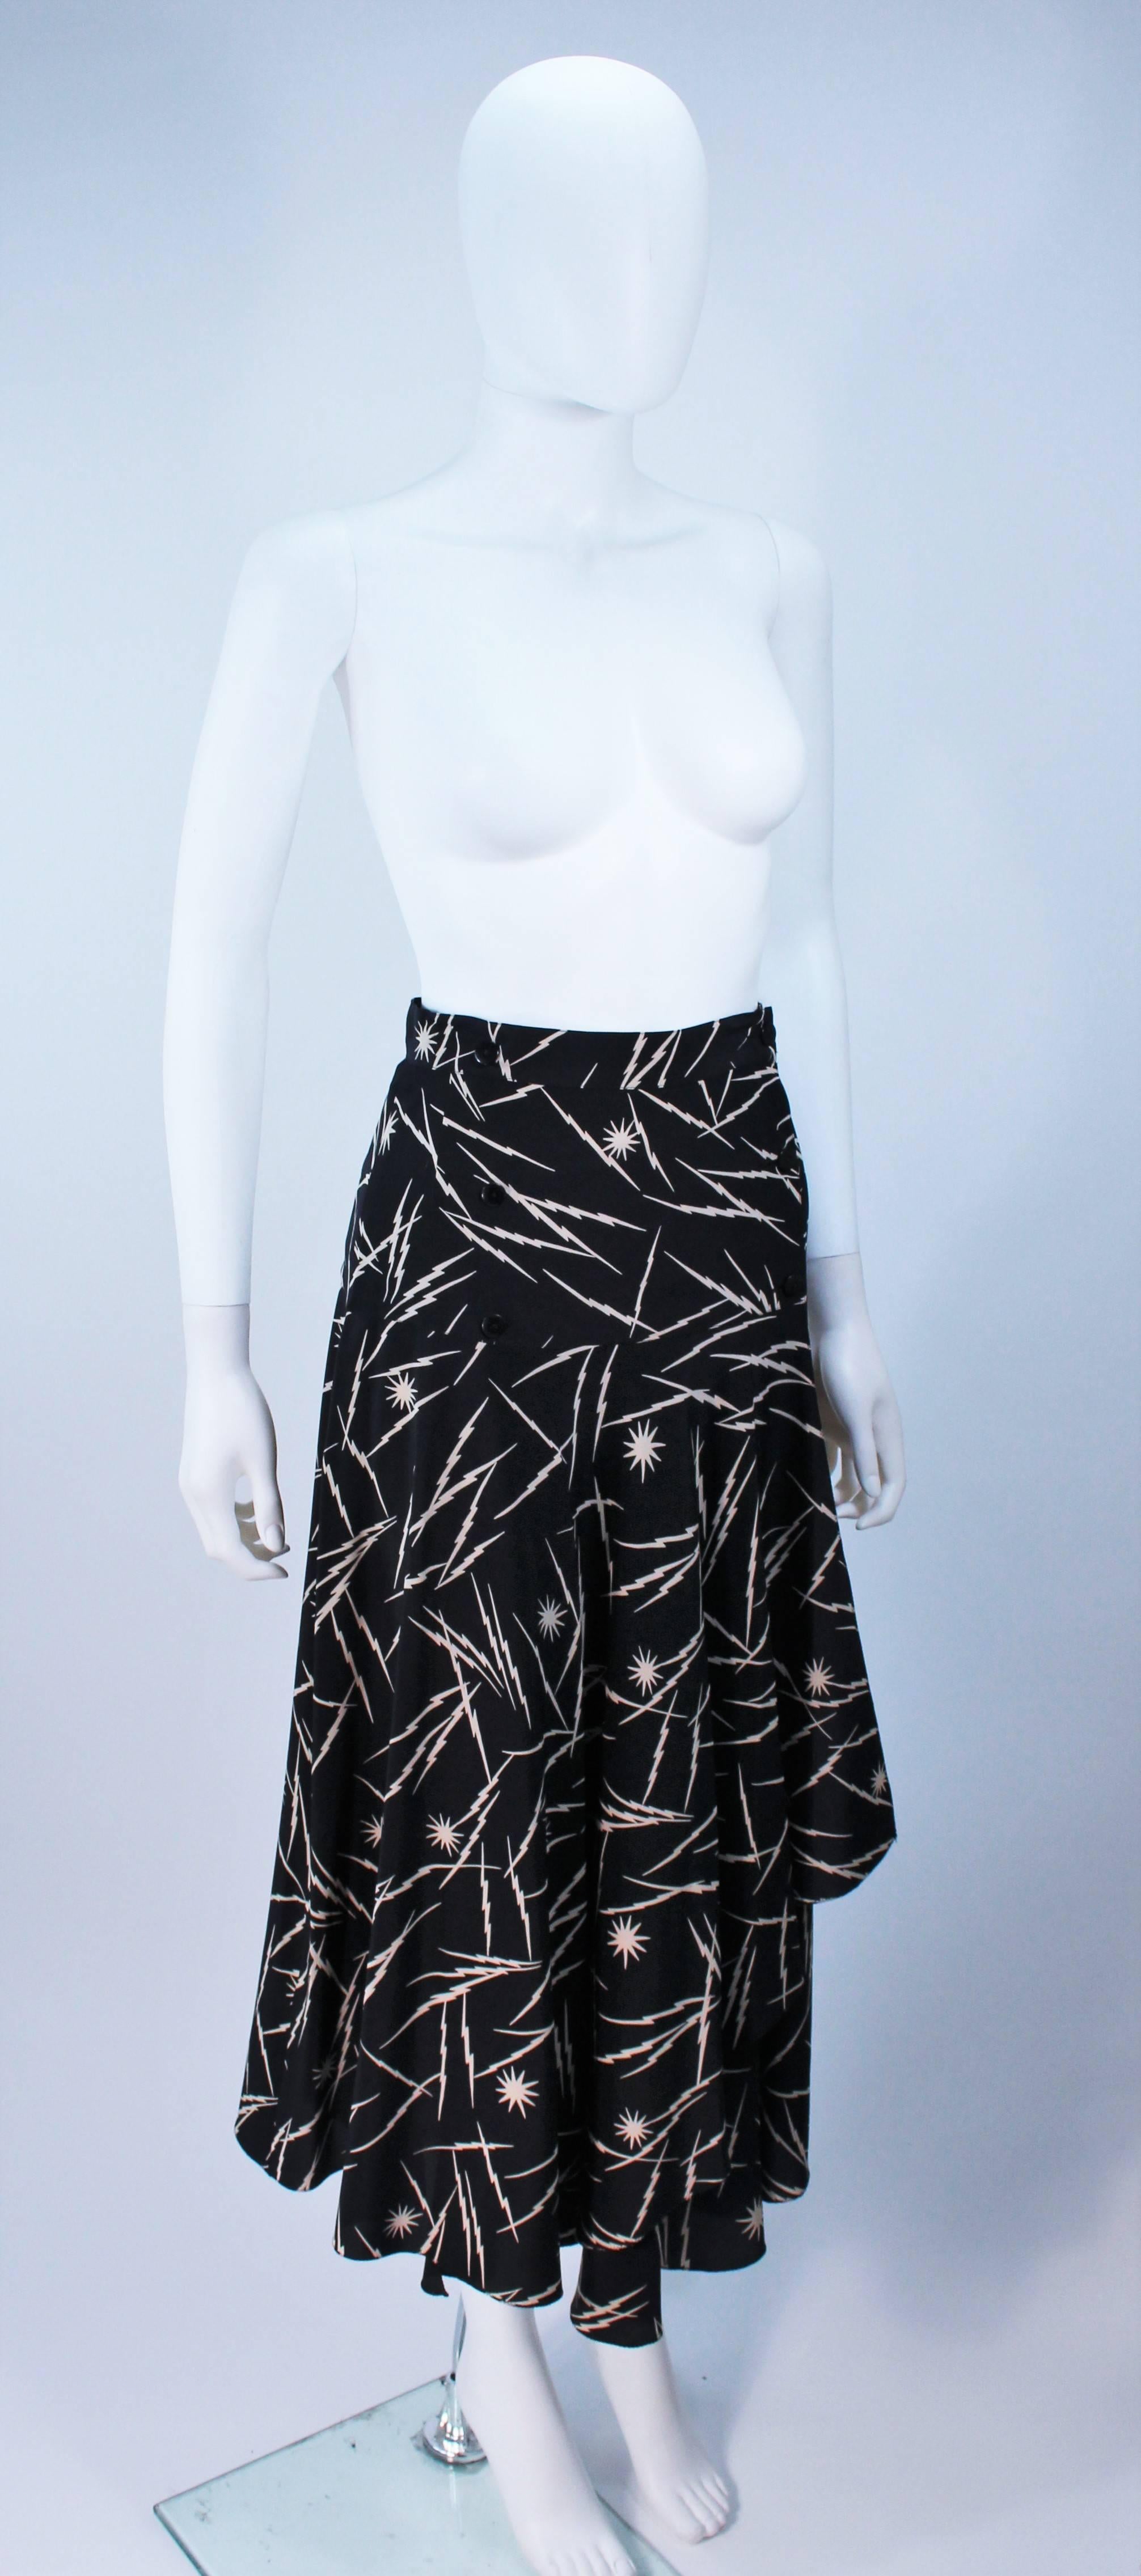 KRIZIA Electrified Black Silk Print Draped Wrap Skirt Size 2 4 In Excellent Condition For Sale In Los Angeles, CA